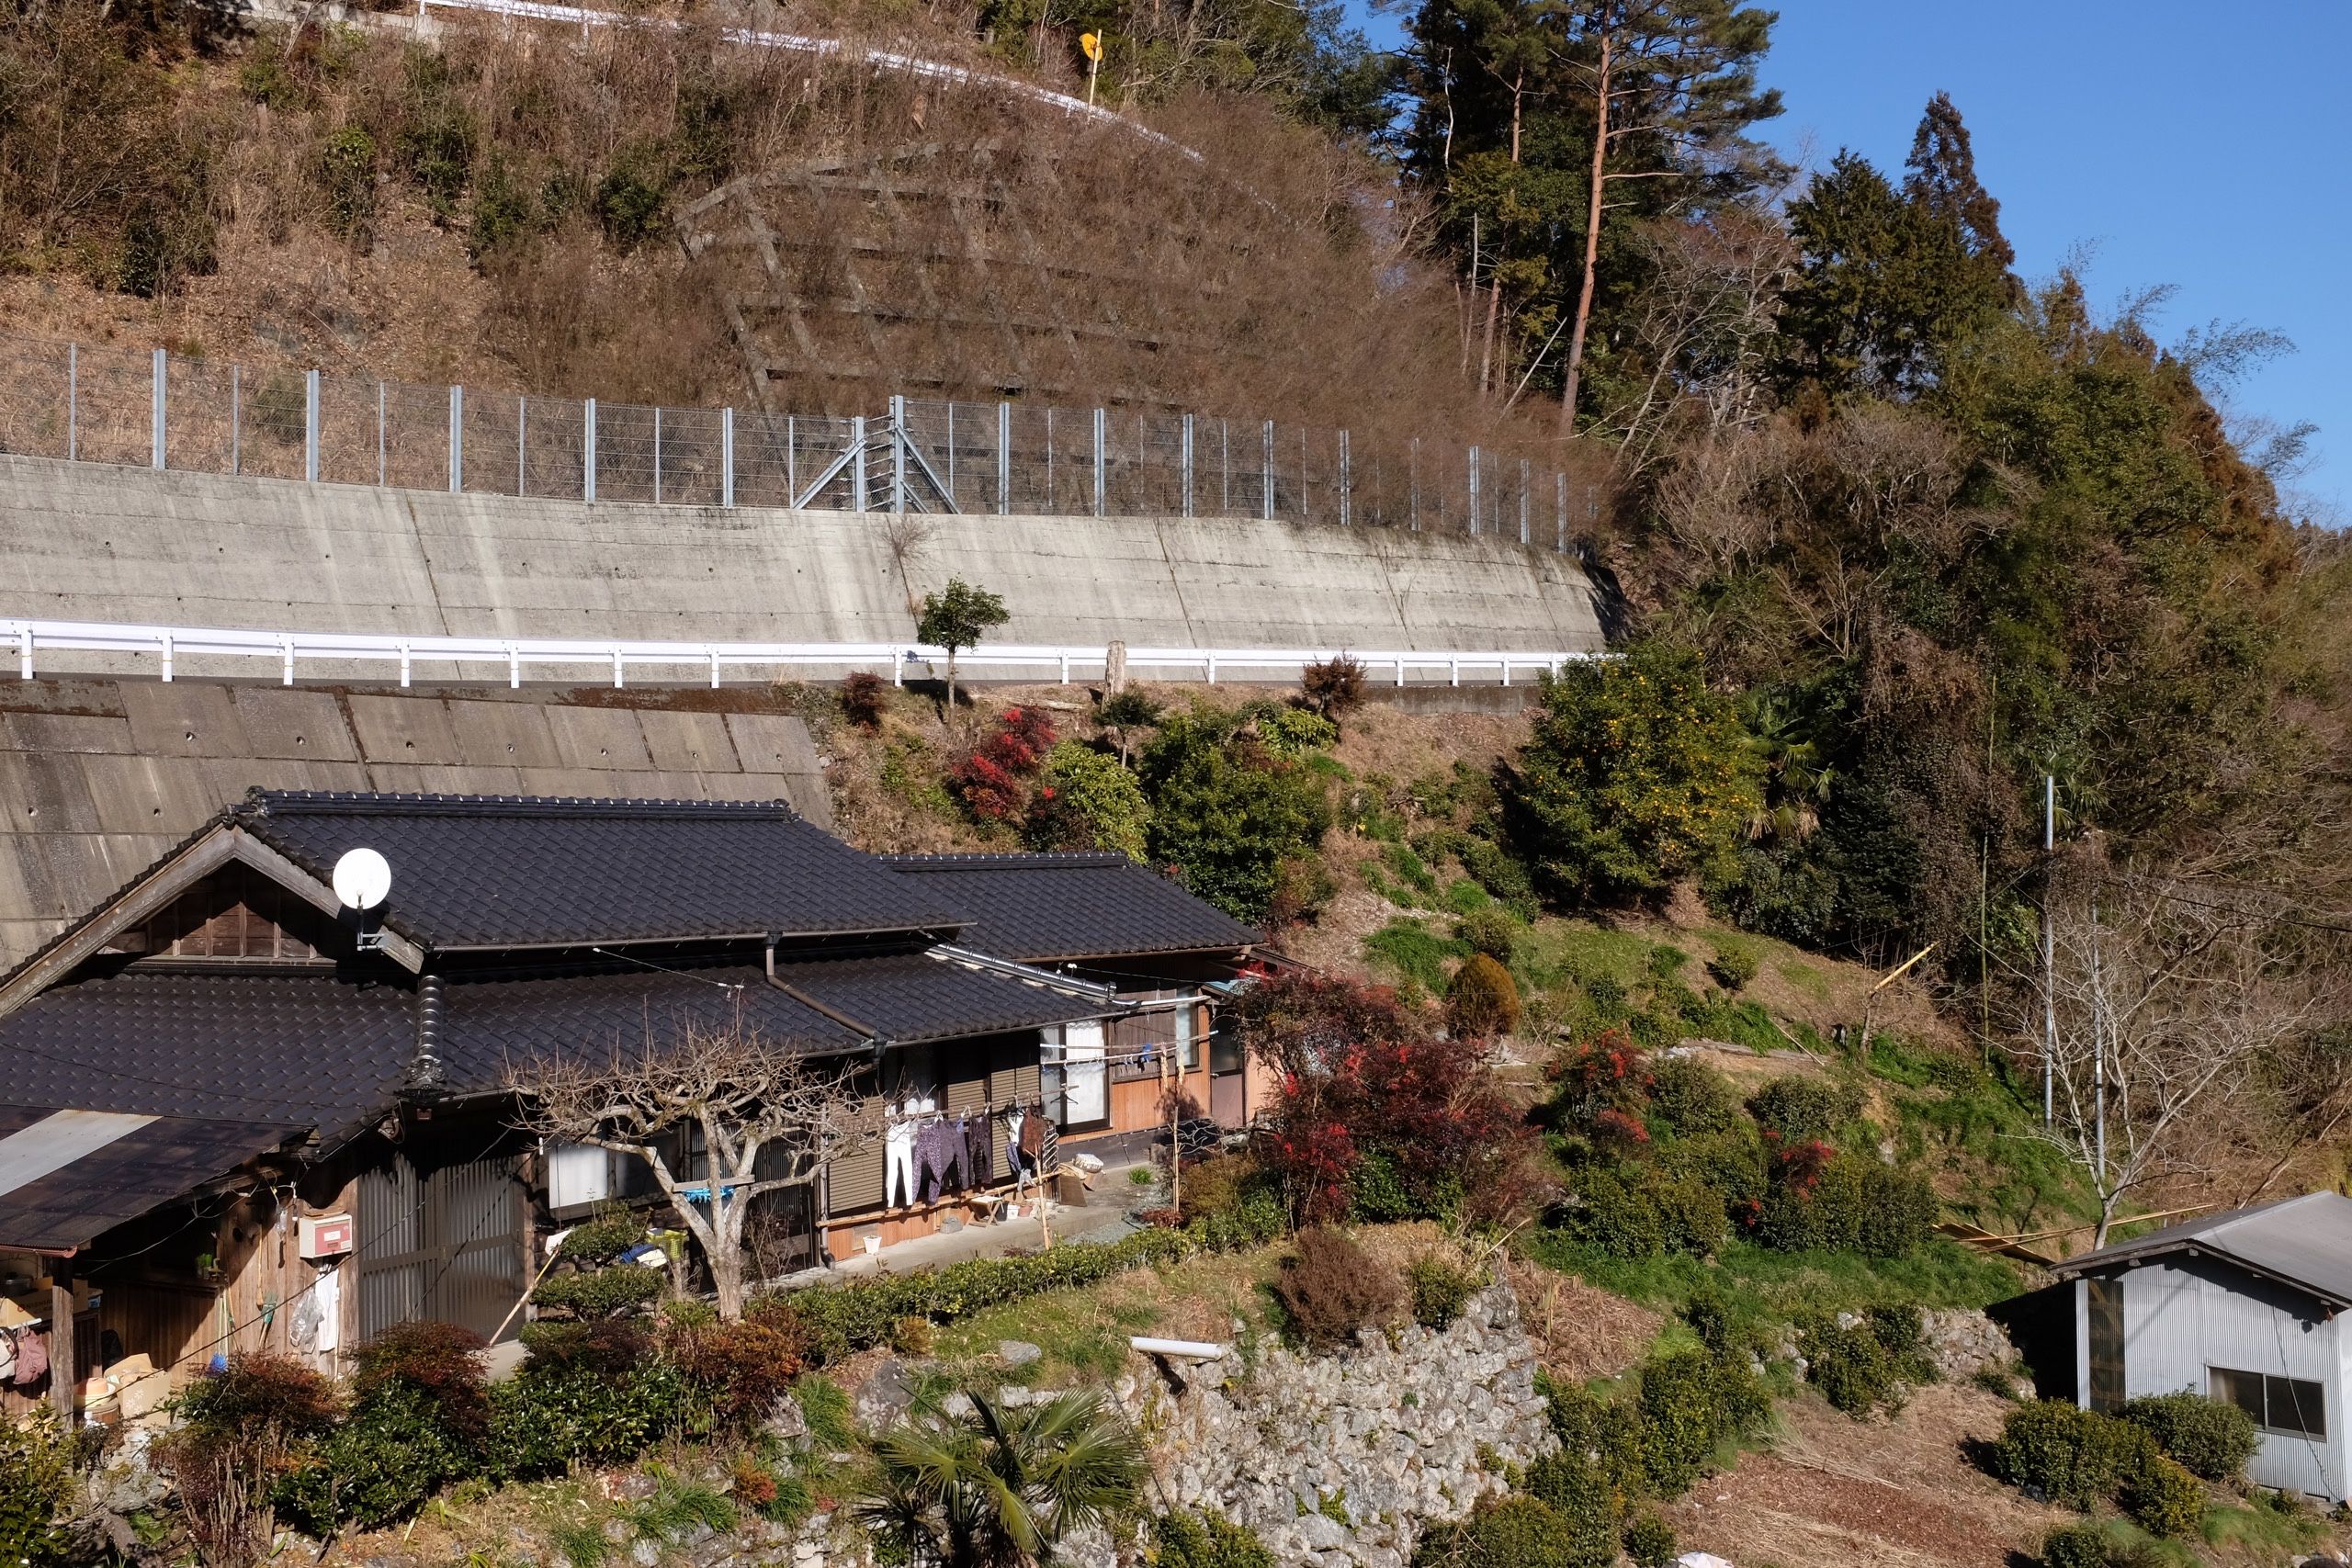 A small Japanese house on a hillside below a road.